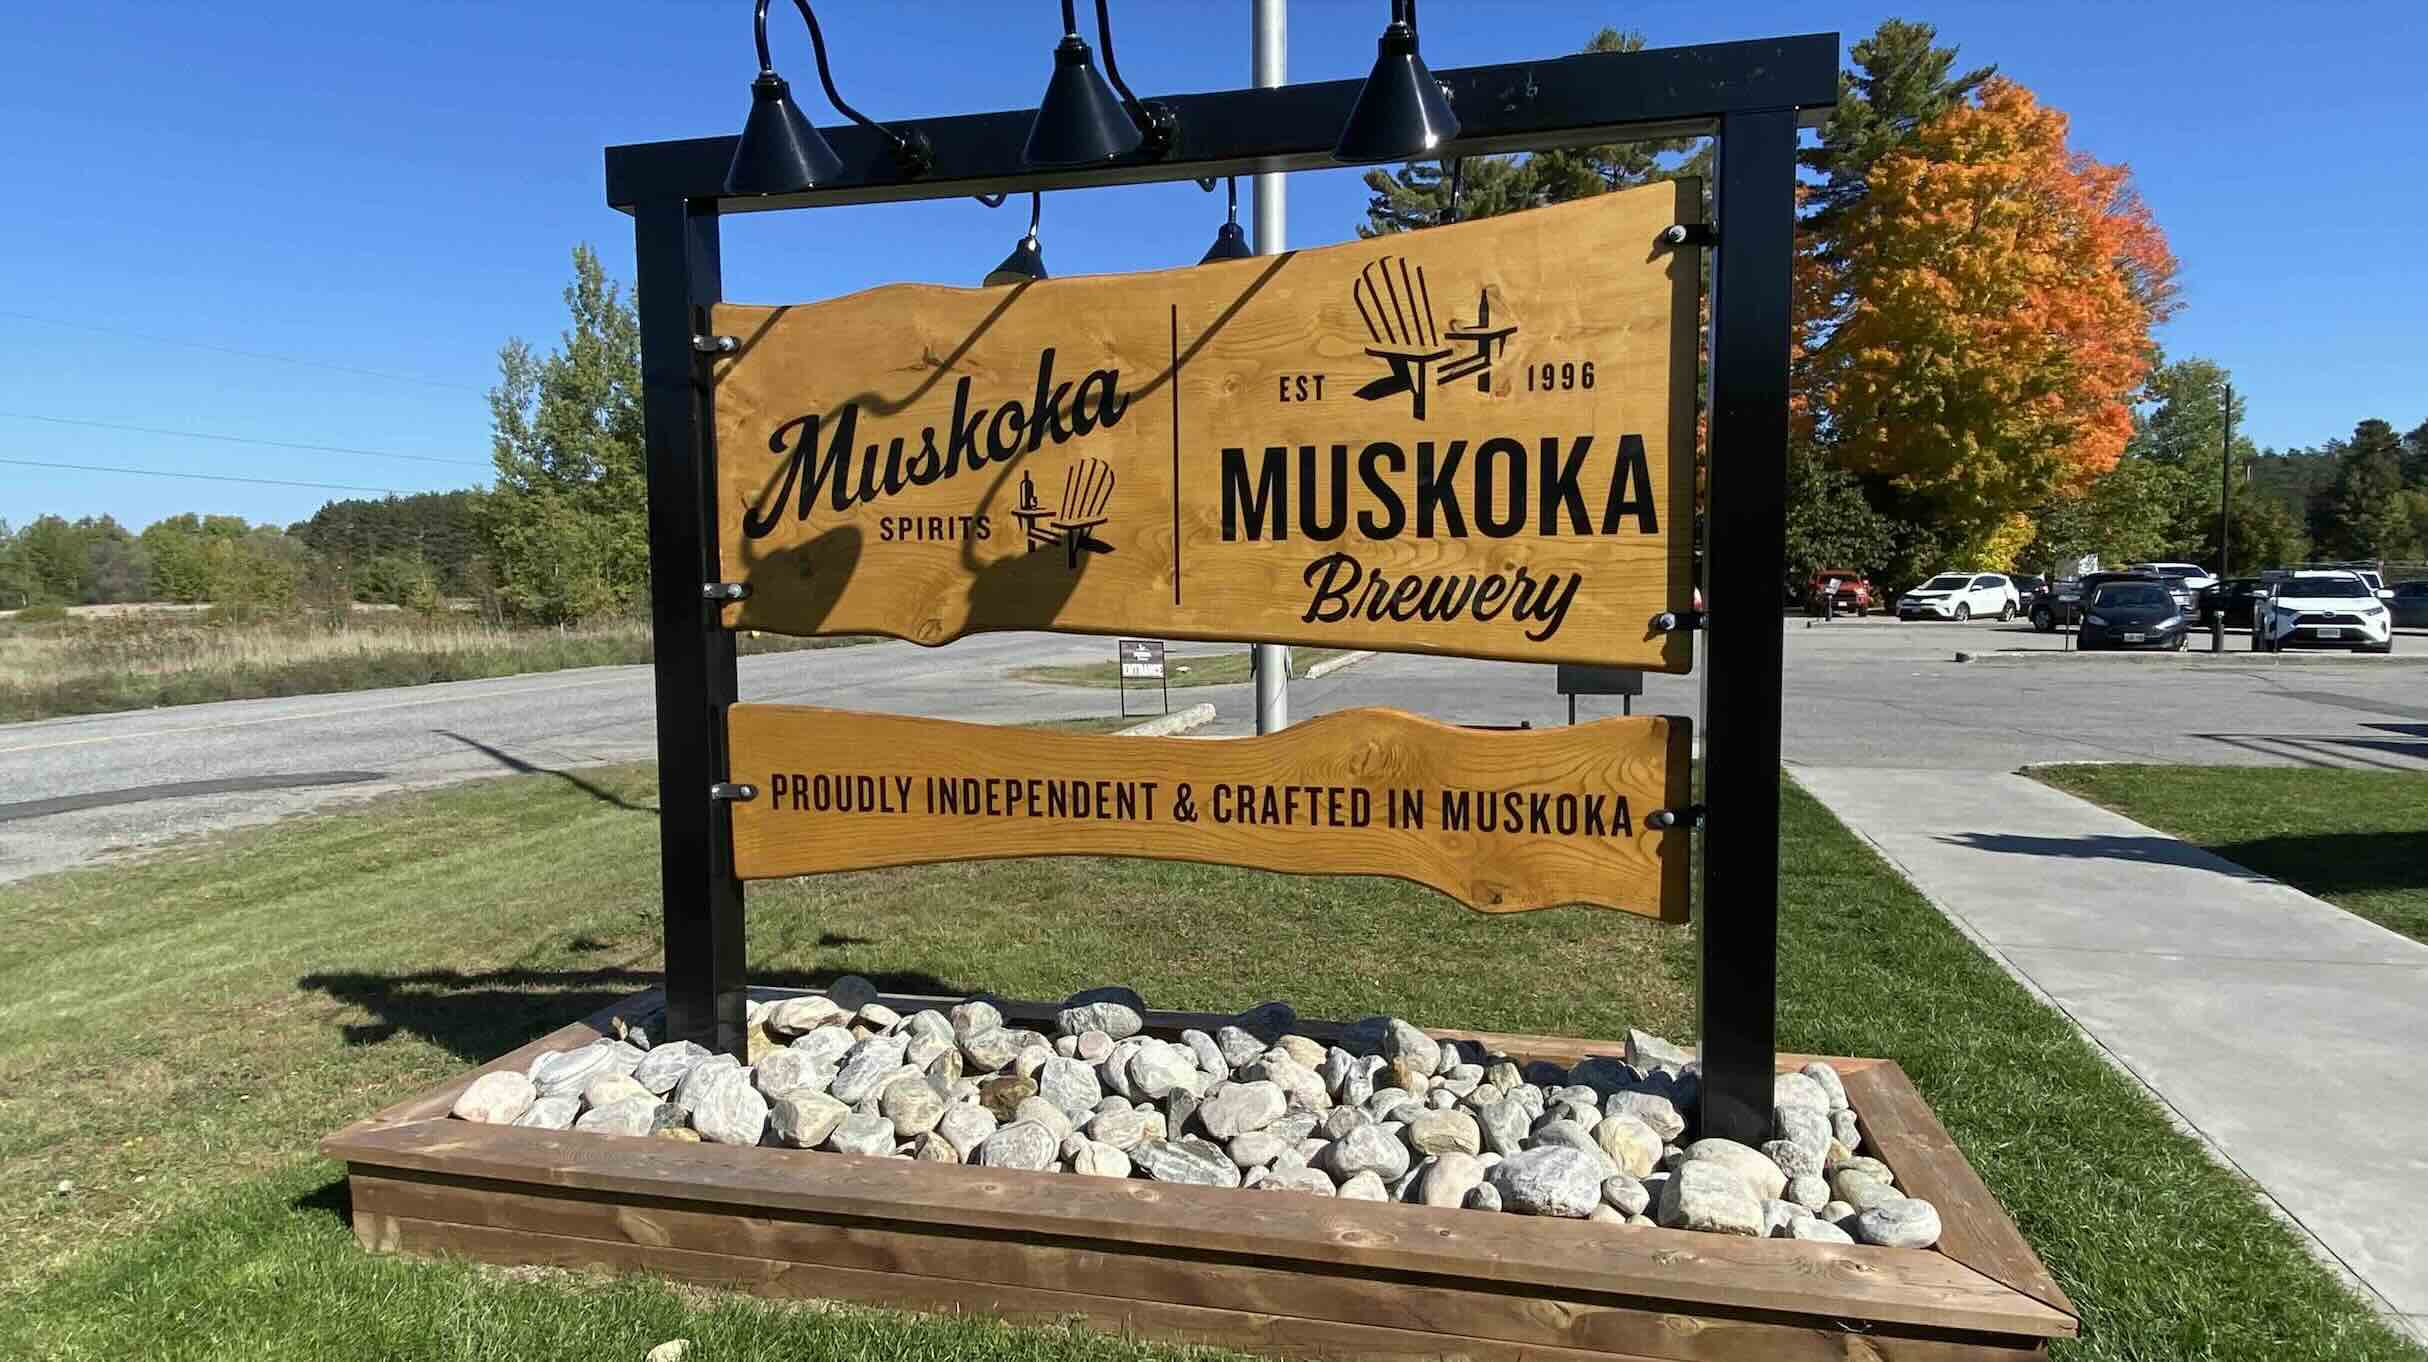 Muskoka Brewery Patio sign at one of the best breweries in Ontario on a summer day Photo by Bryan Dearsley